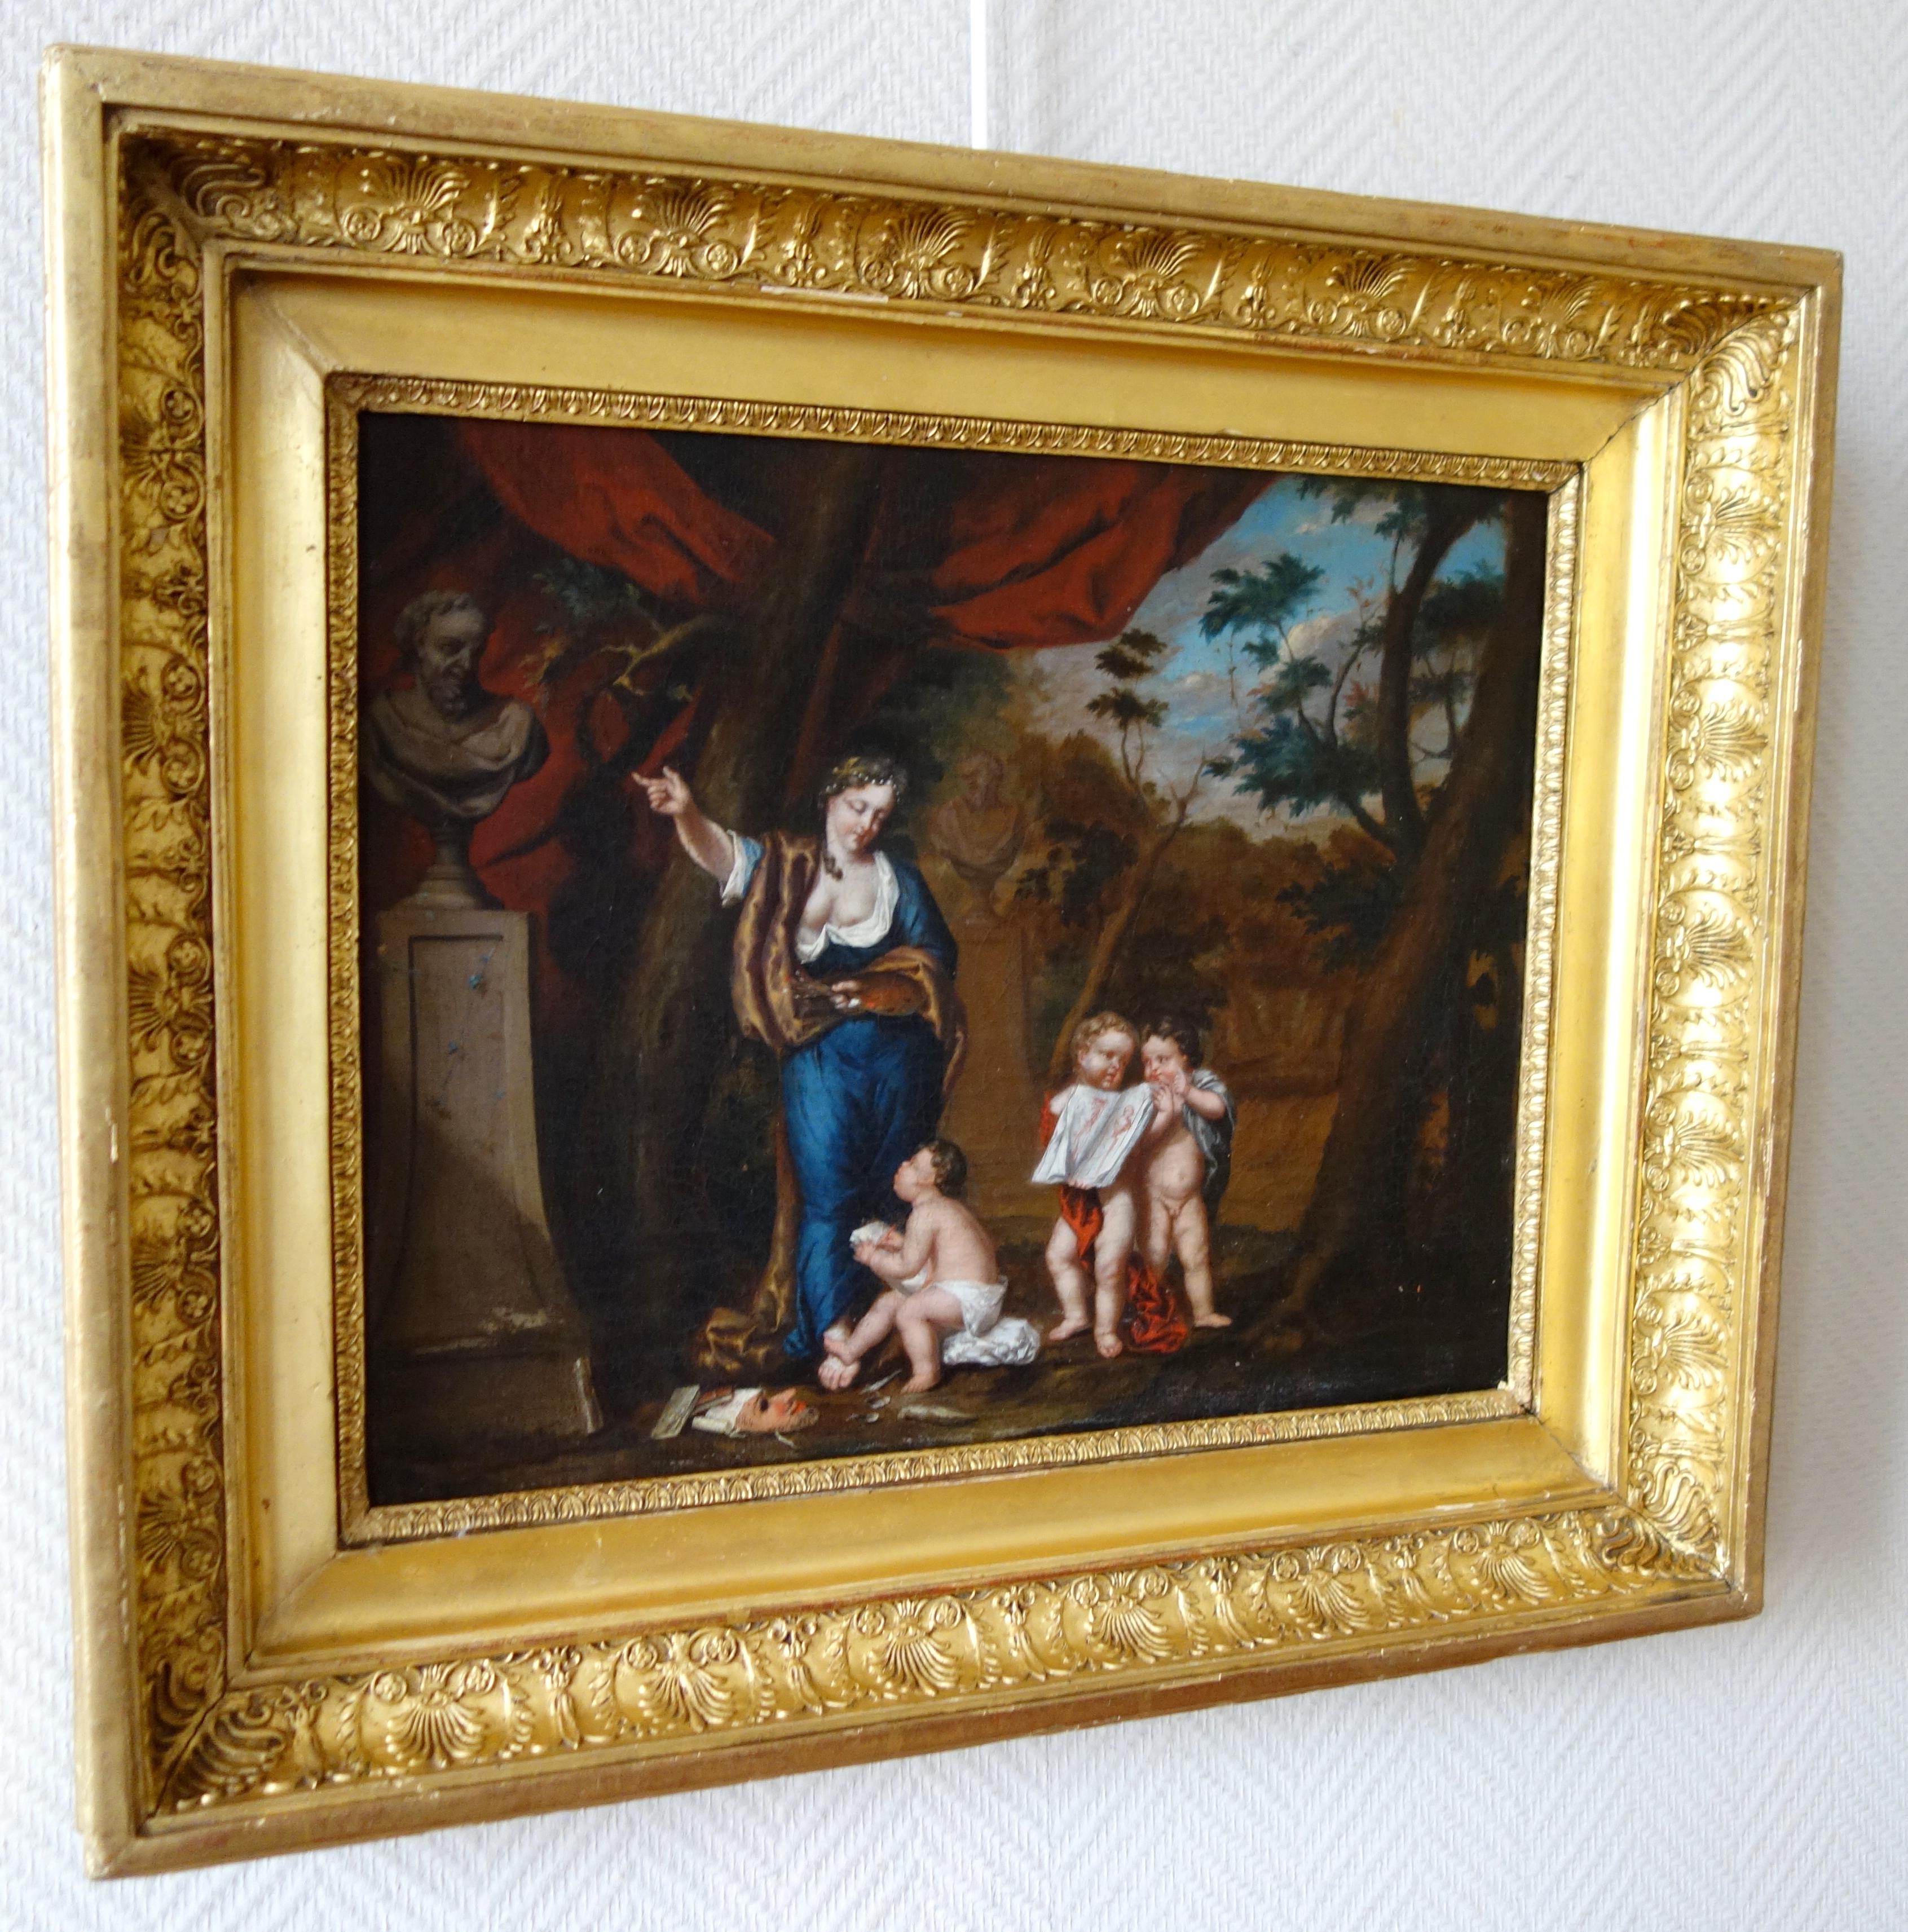 Regency Allegory of painting, early 18th century French school - oil on panel For Sale